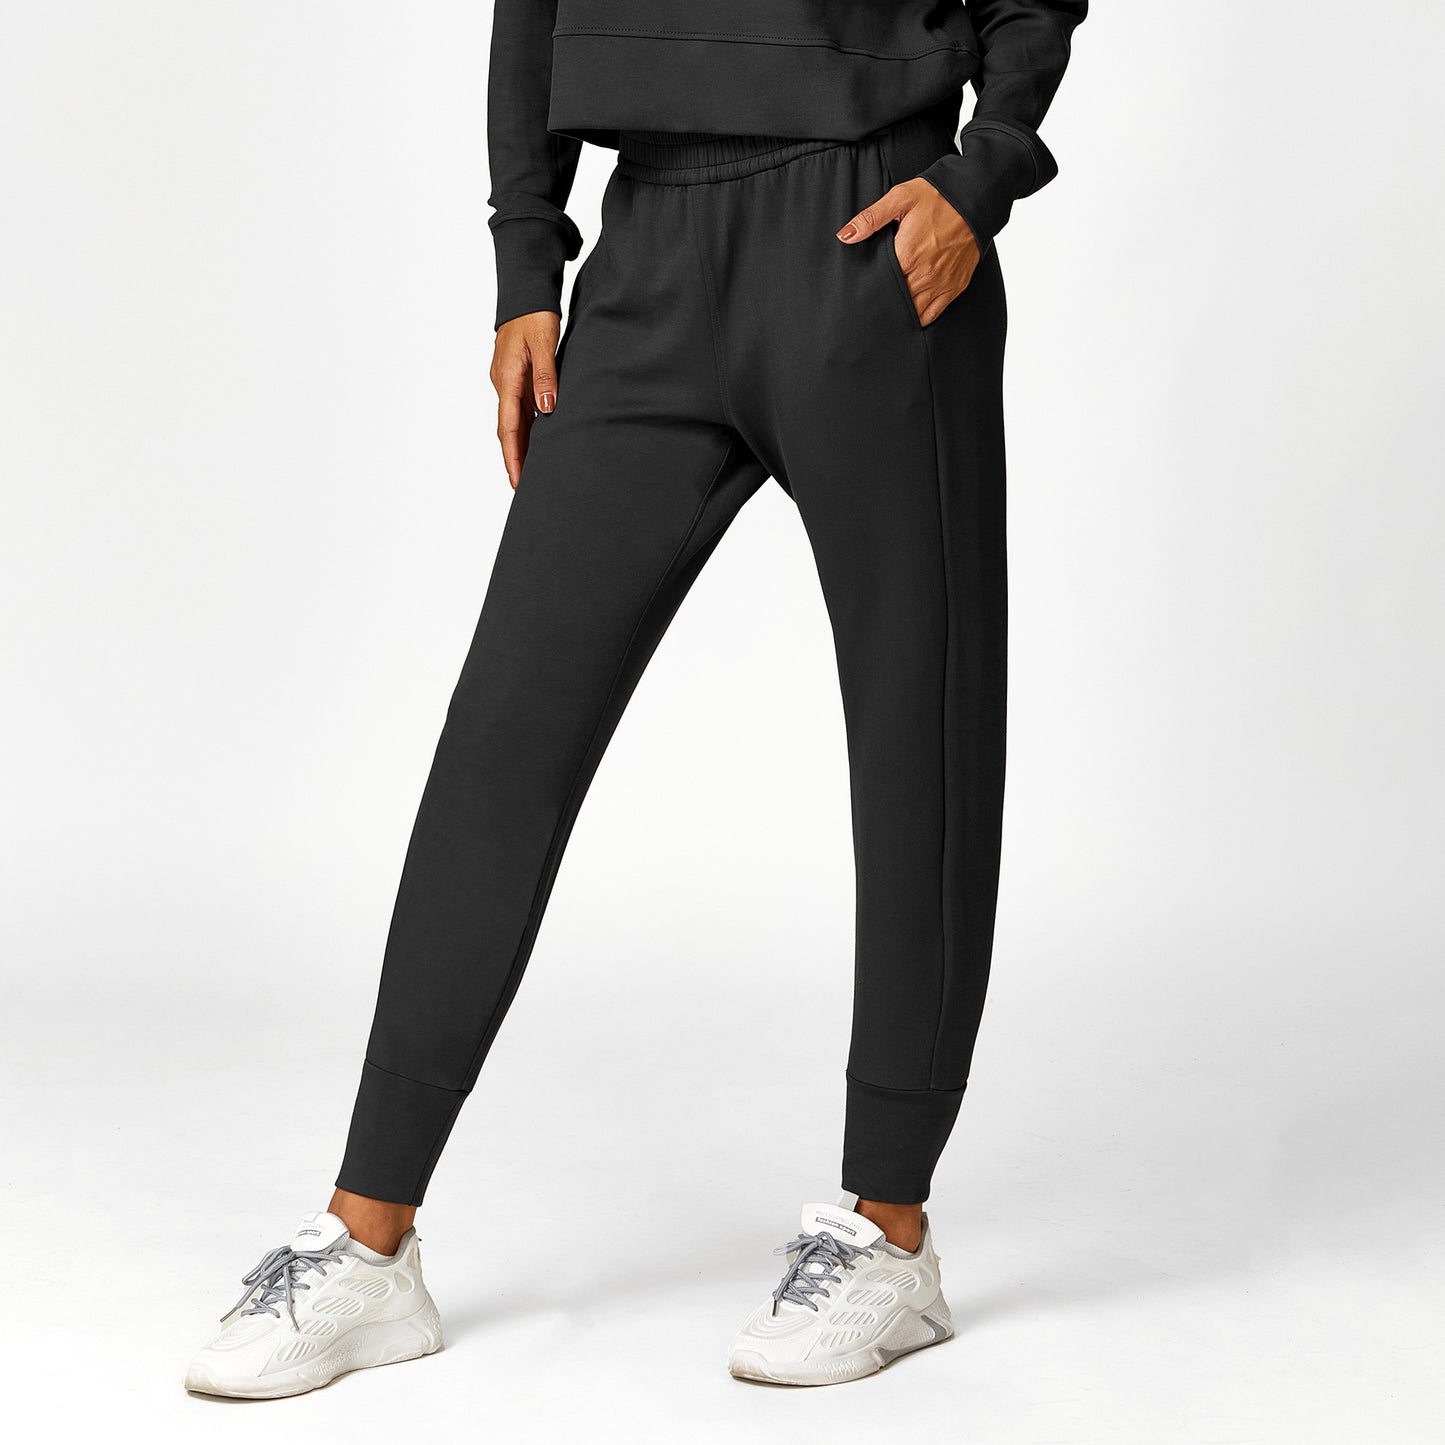 Solid stretch jogging bottoms